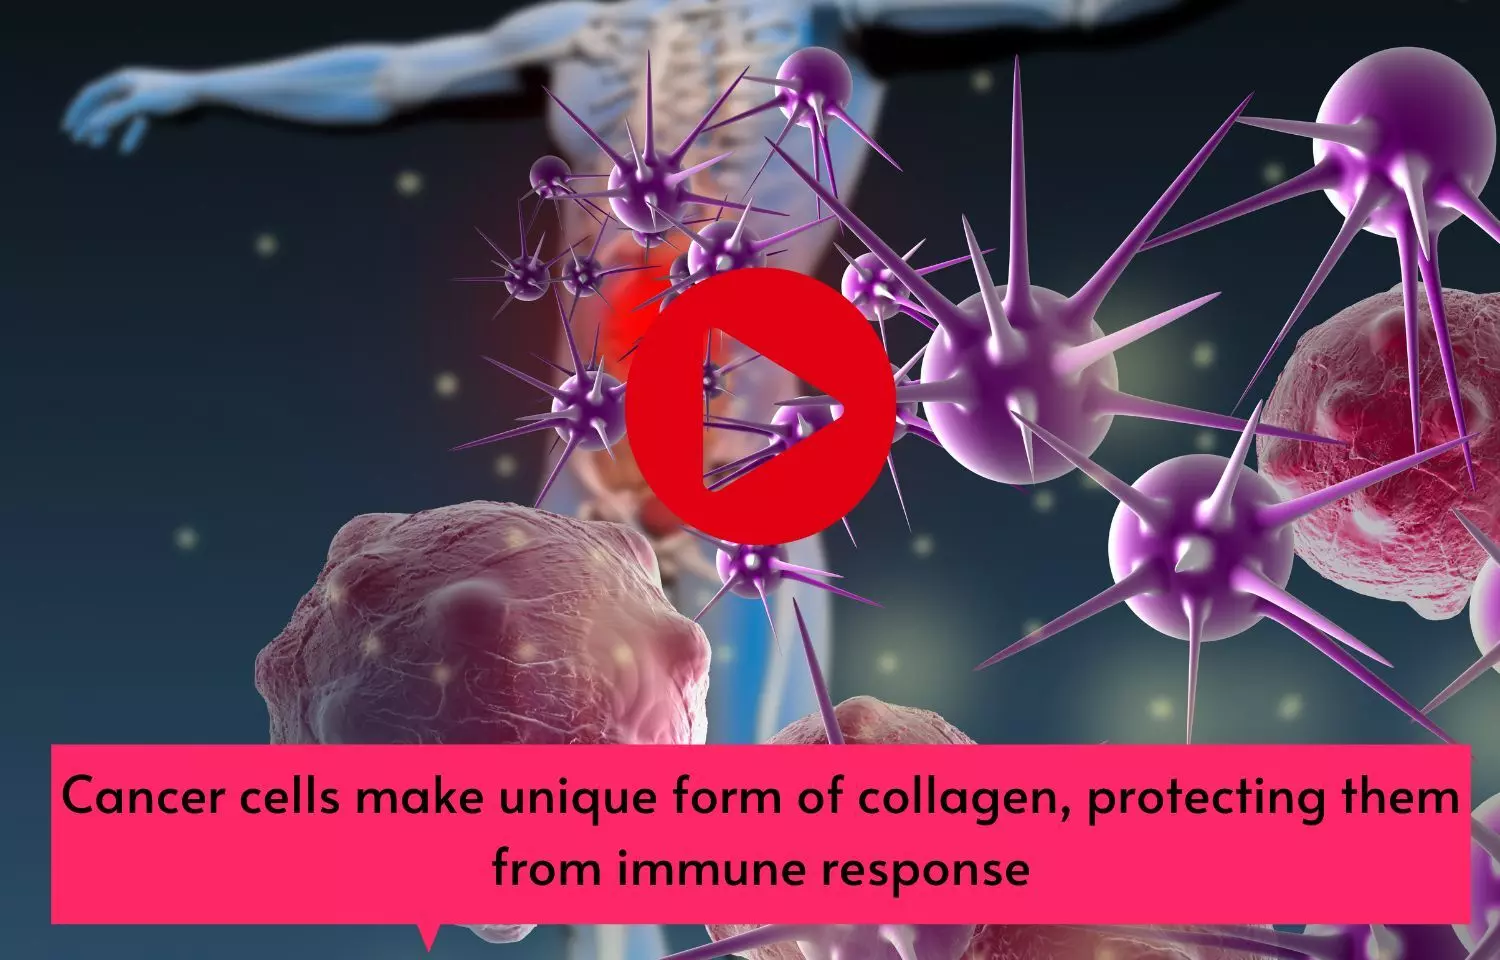 Cancer cells make unique form of collagen, protecting them from immune response